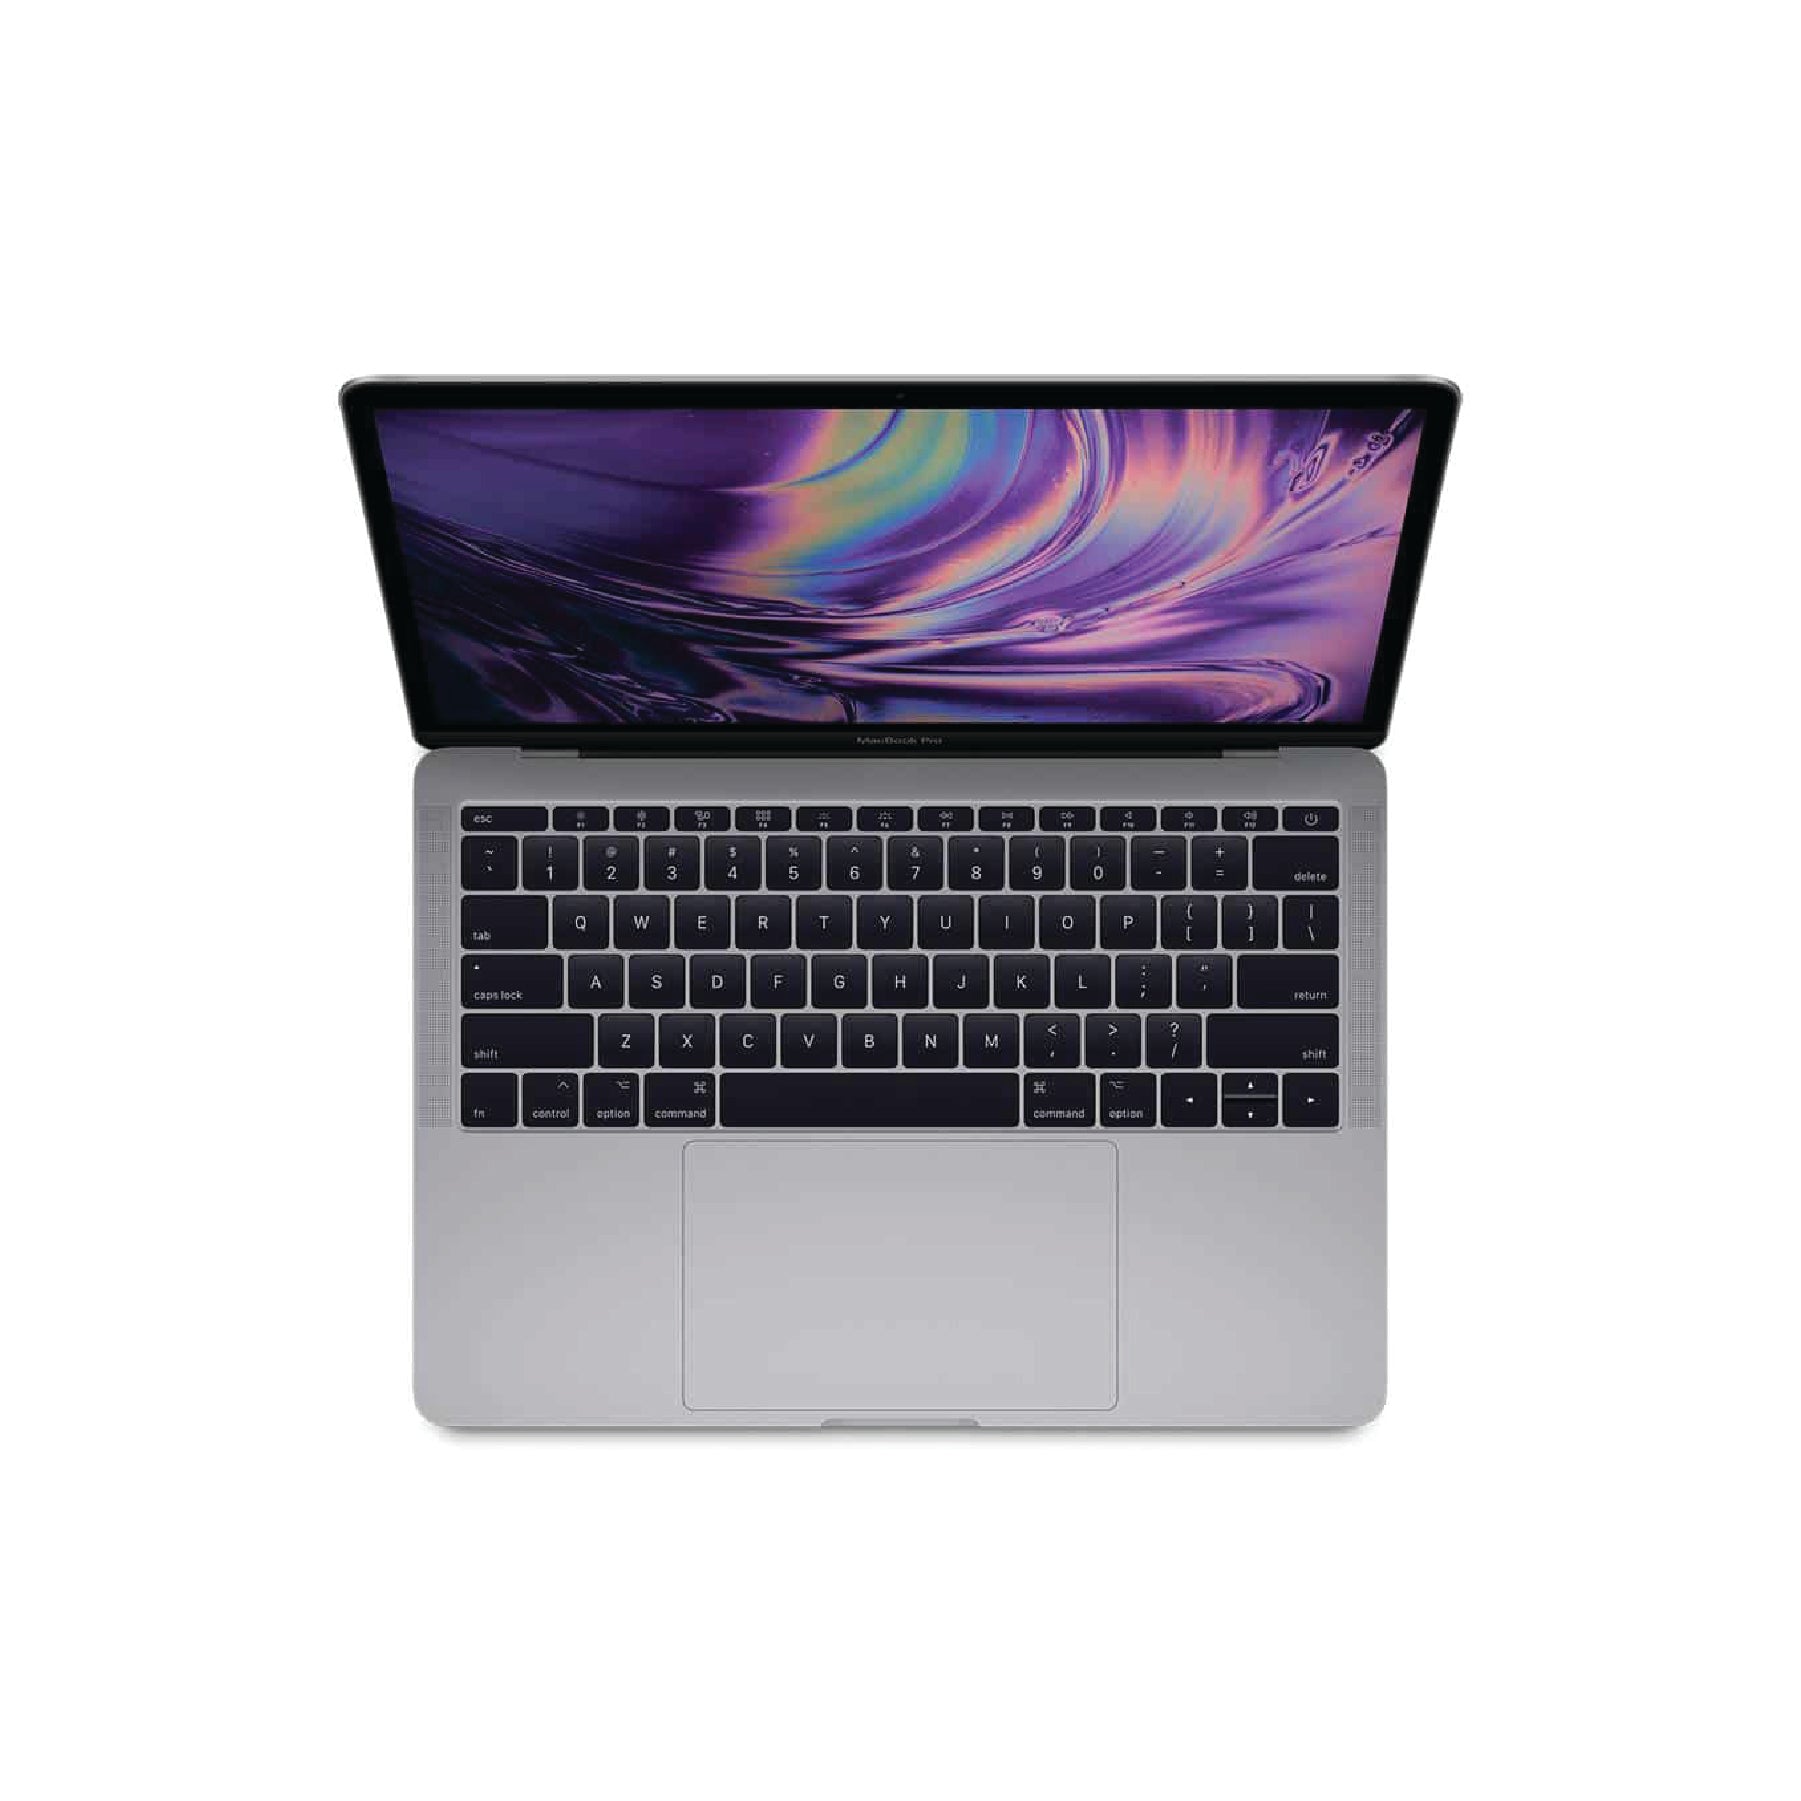 MacBook Pro (13-inch, 2016, Two Thunderbolt 3 ports) - iStore Pre-owned